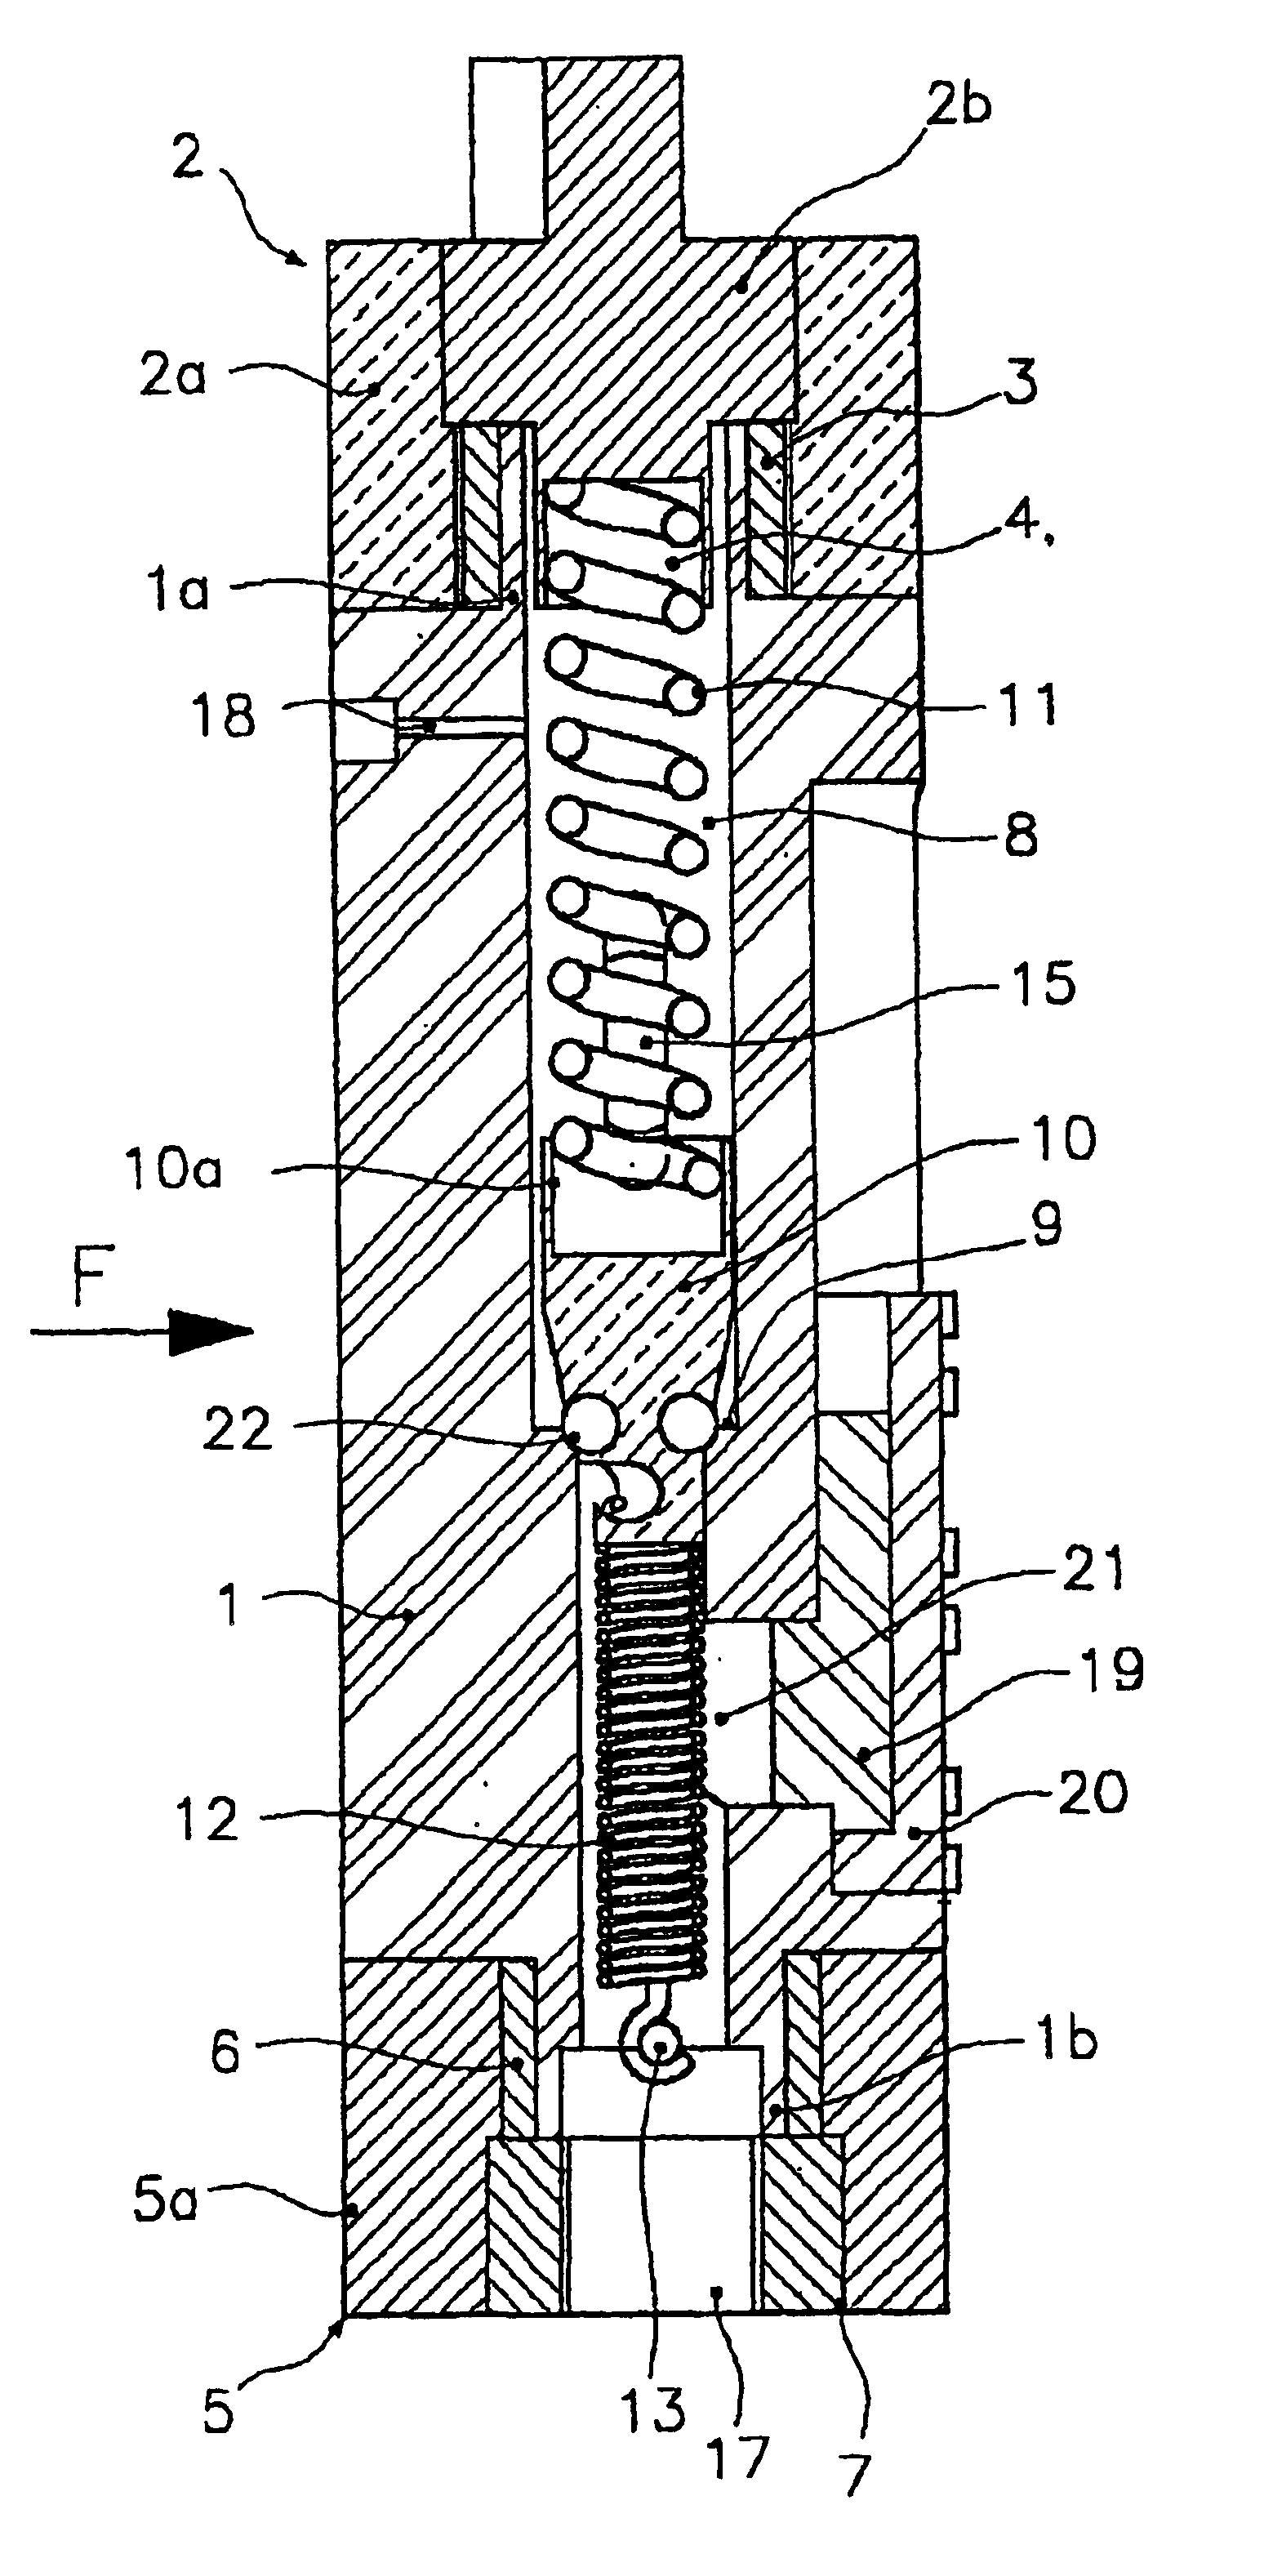 Proportional valve with shape memory alloy actuator